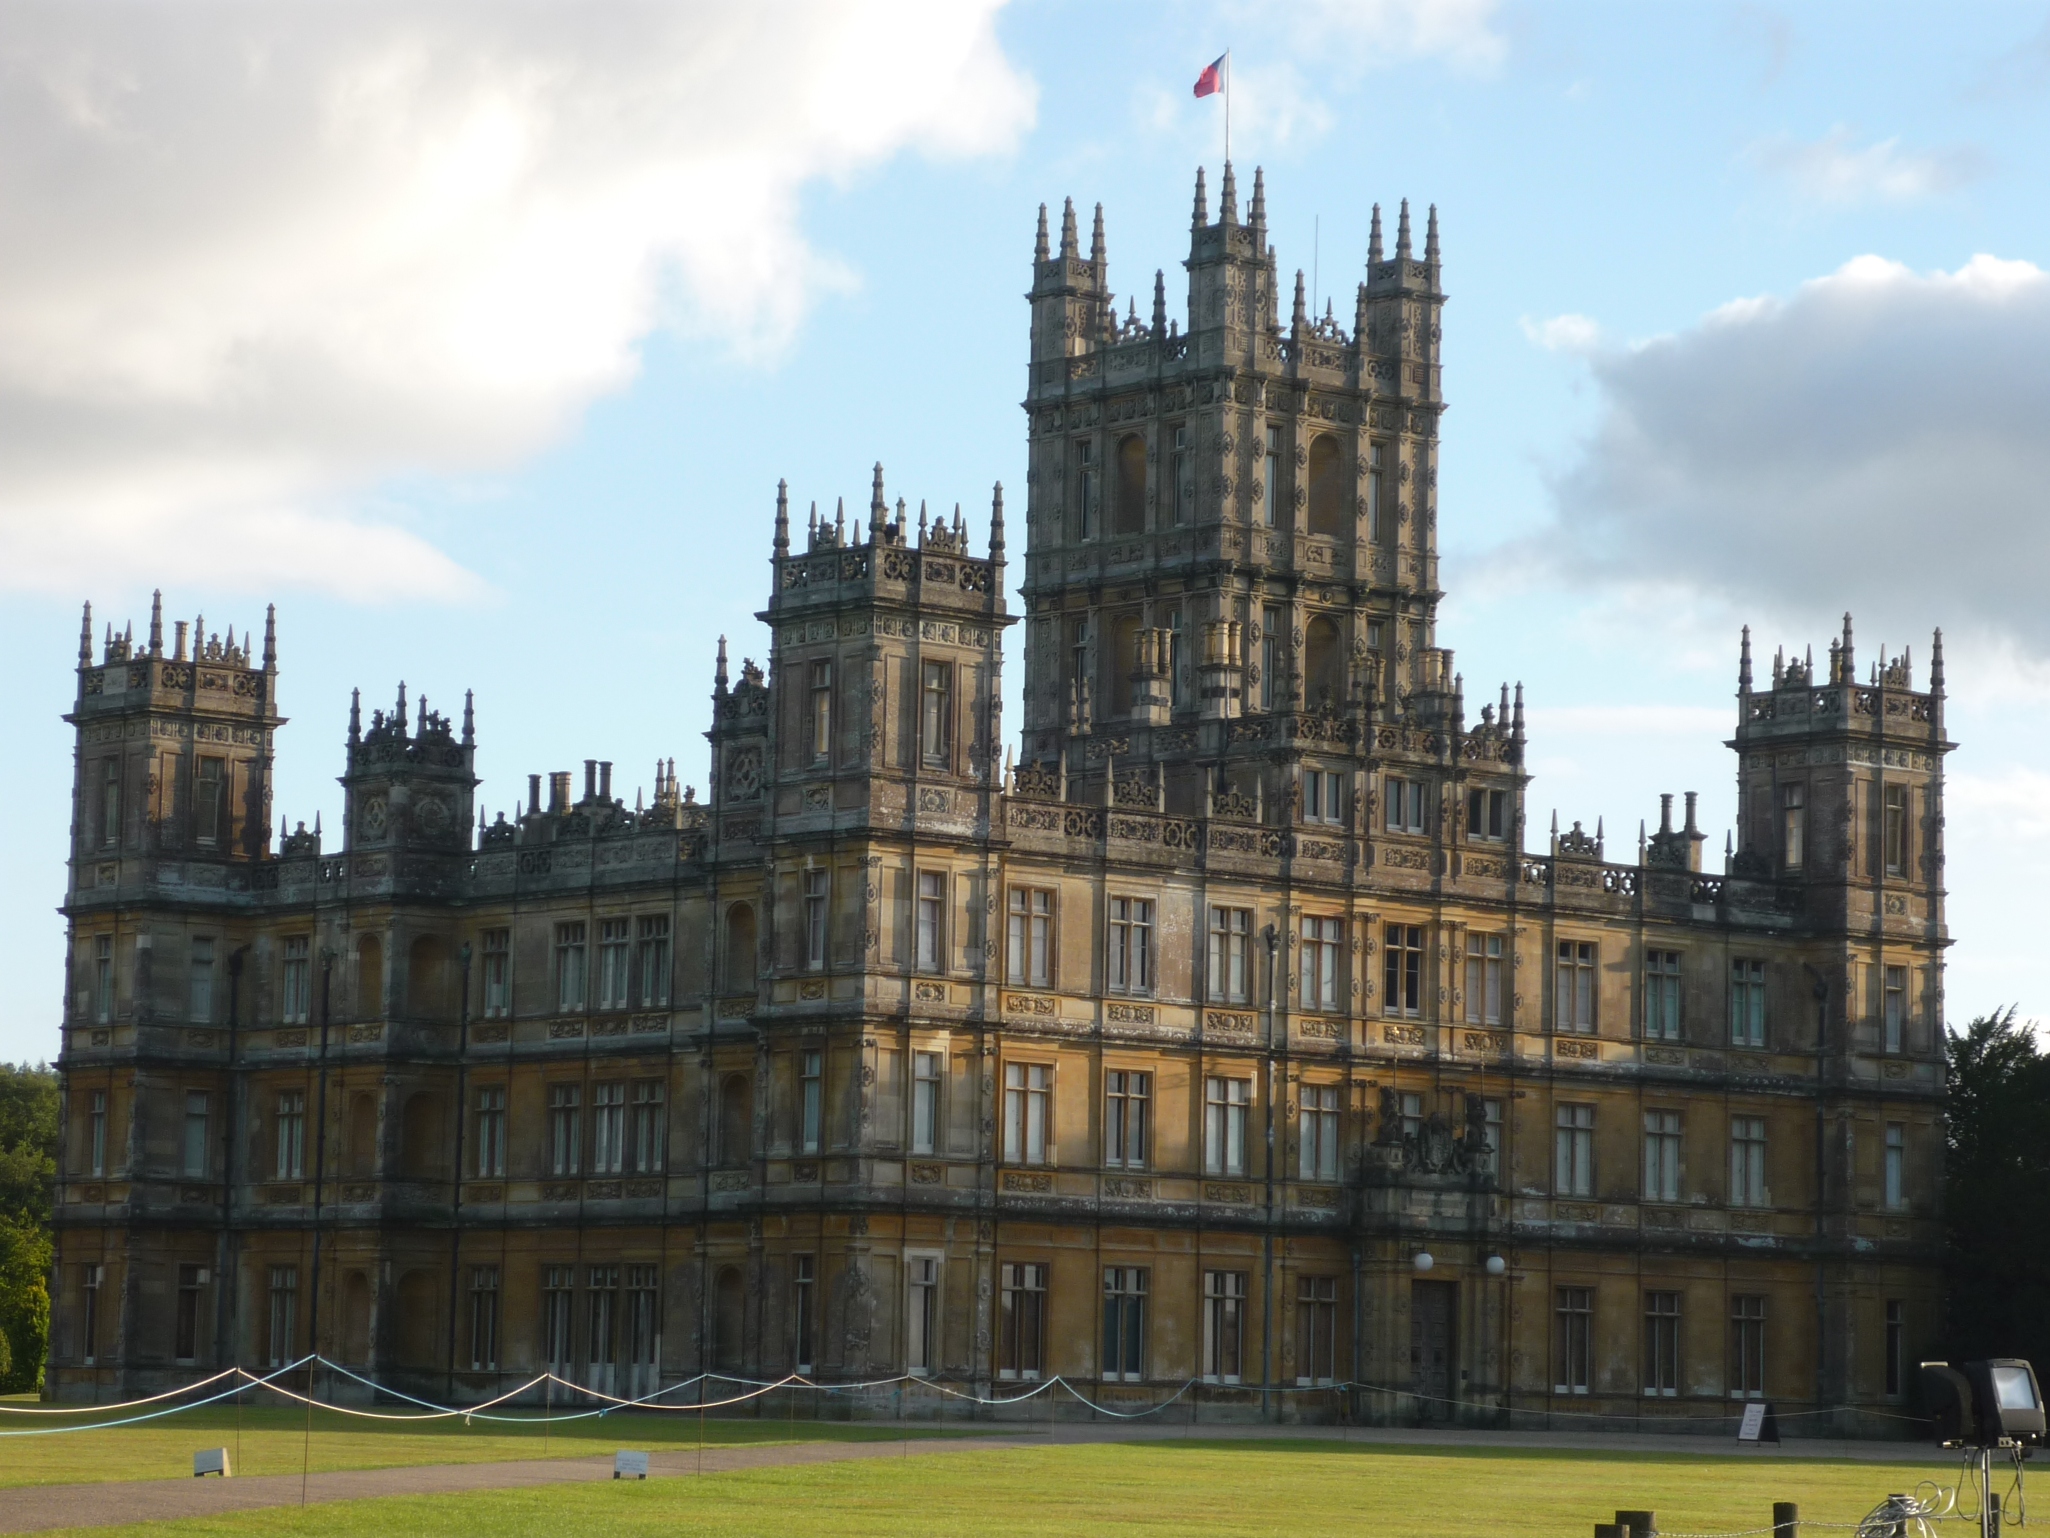 Downton Abbey, filming location